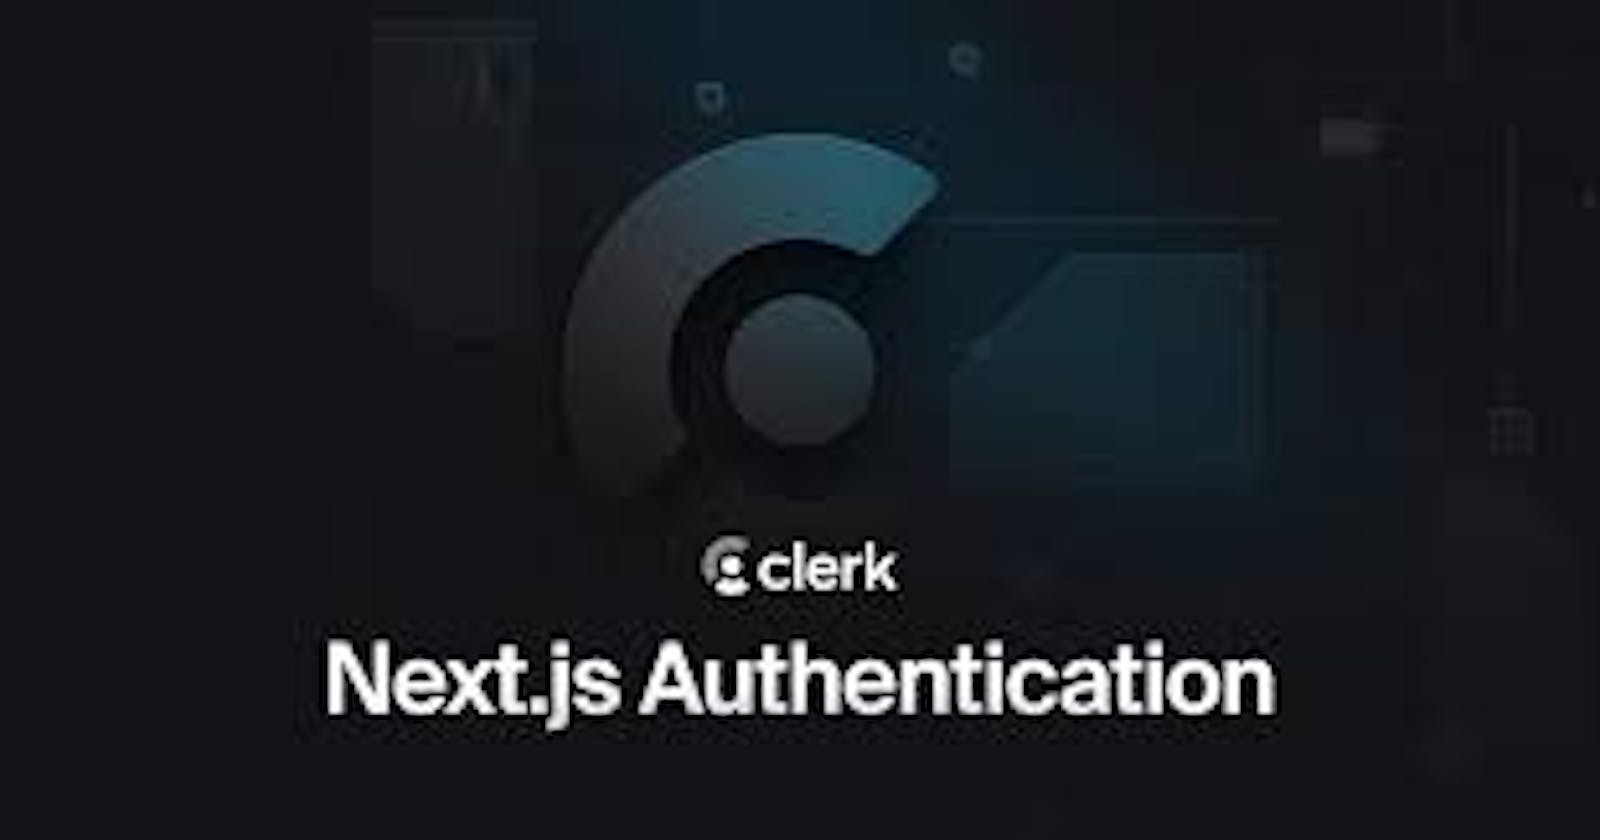 Implementing Authentication in your Next.js application using Clerk